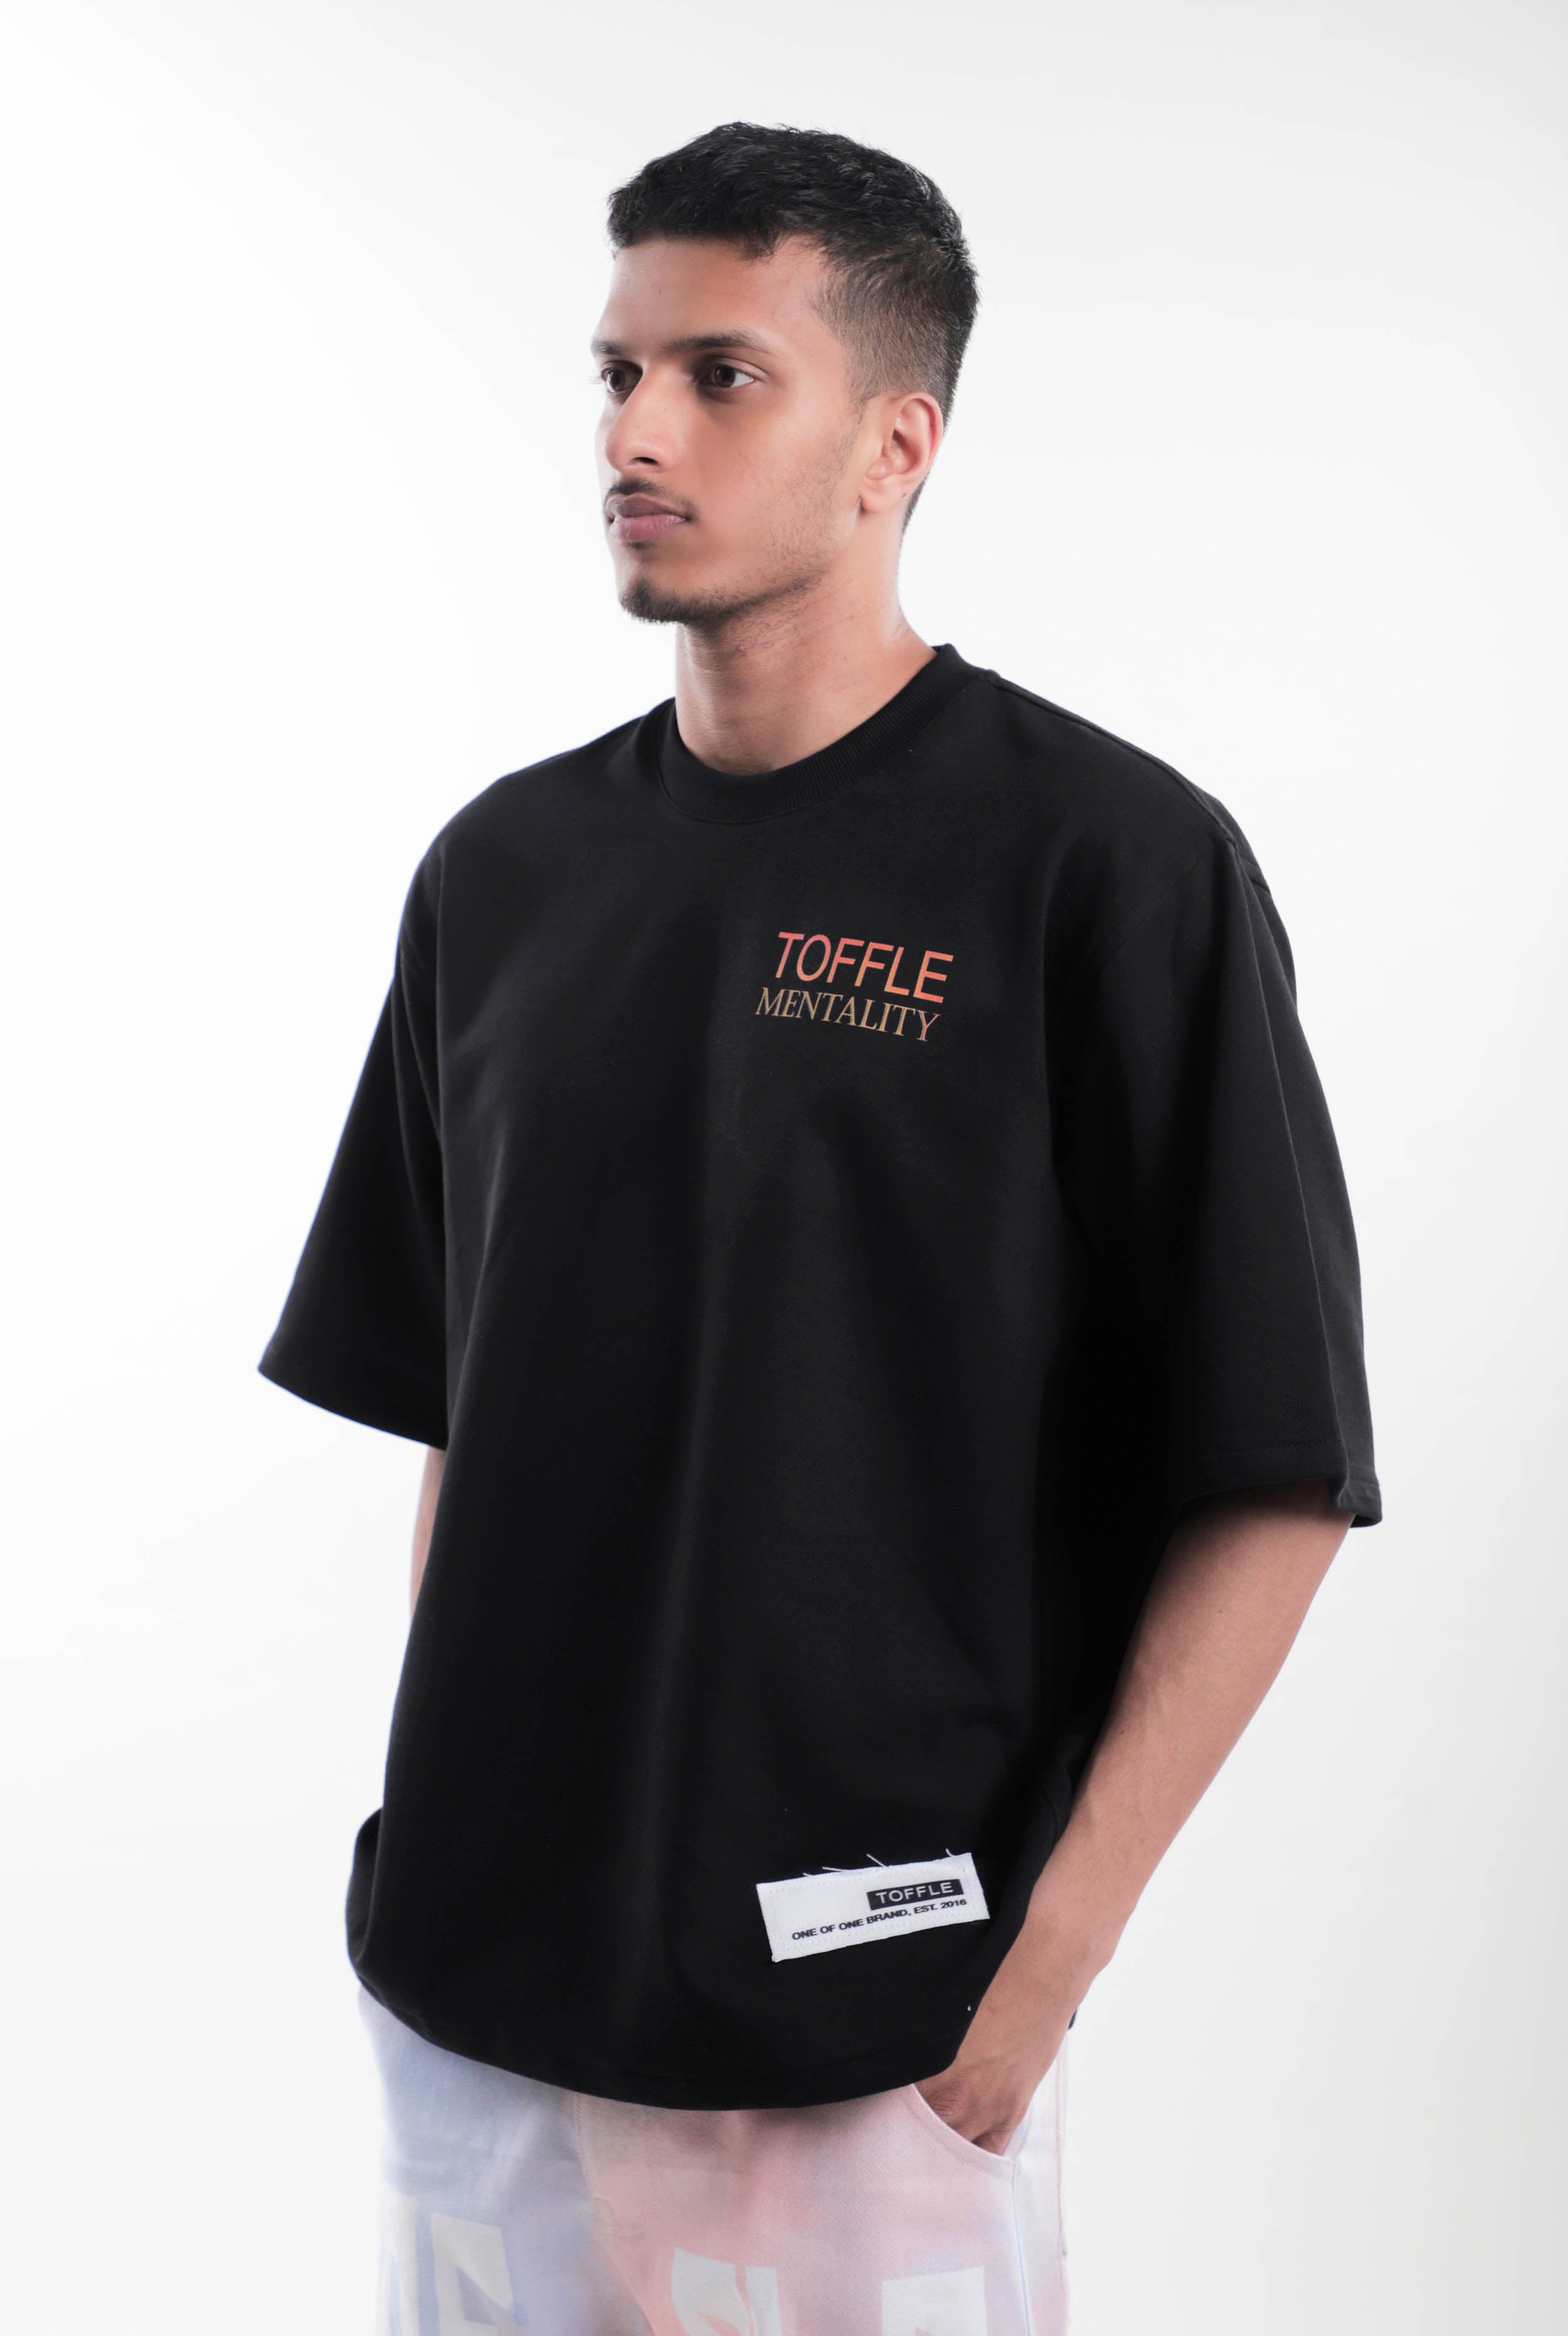 Toffle Mentality T-Shirt